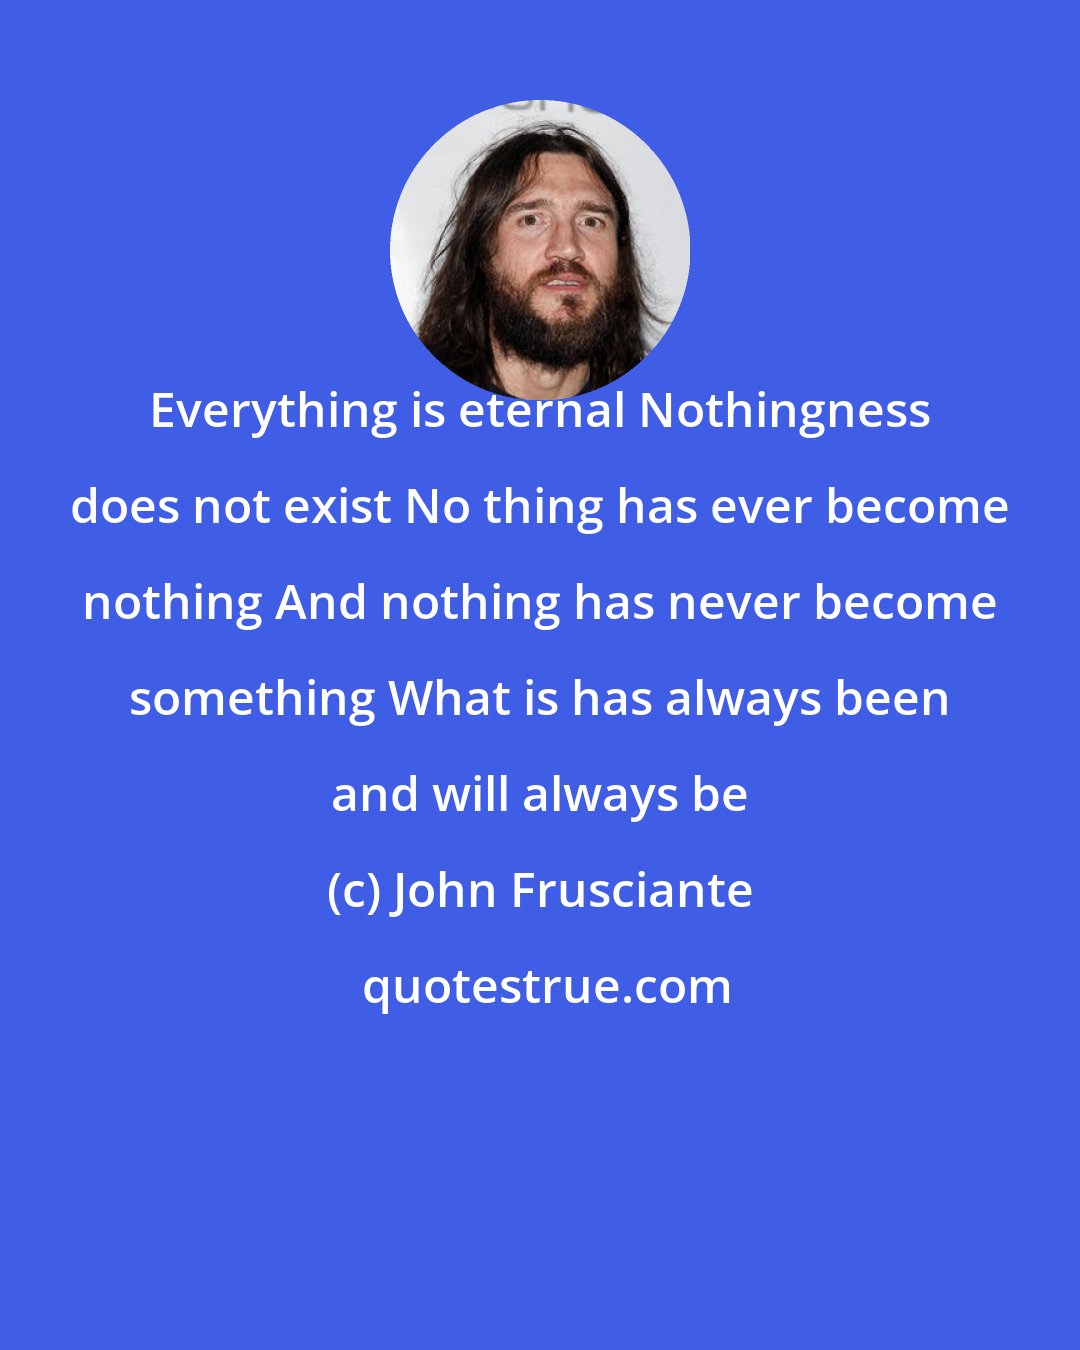 John Frusciante: Everything is eternal Nothingness does not exist No thing has ever become nothing And nothing has never become something What is has always been and will always be